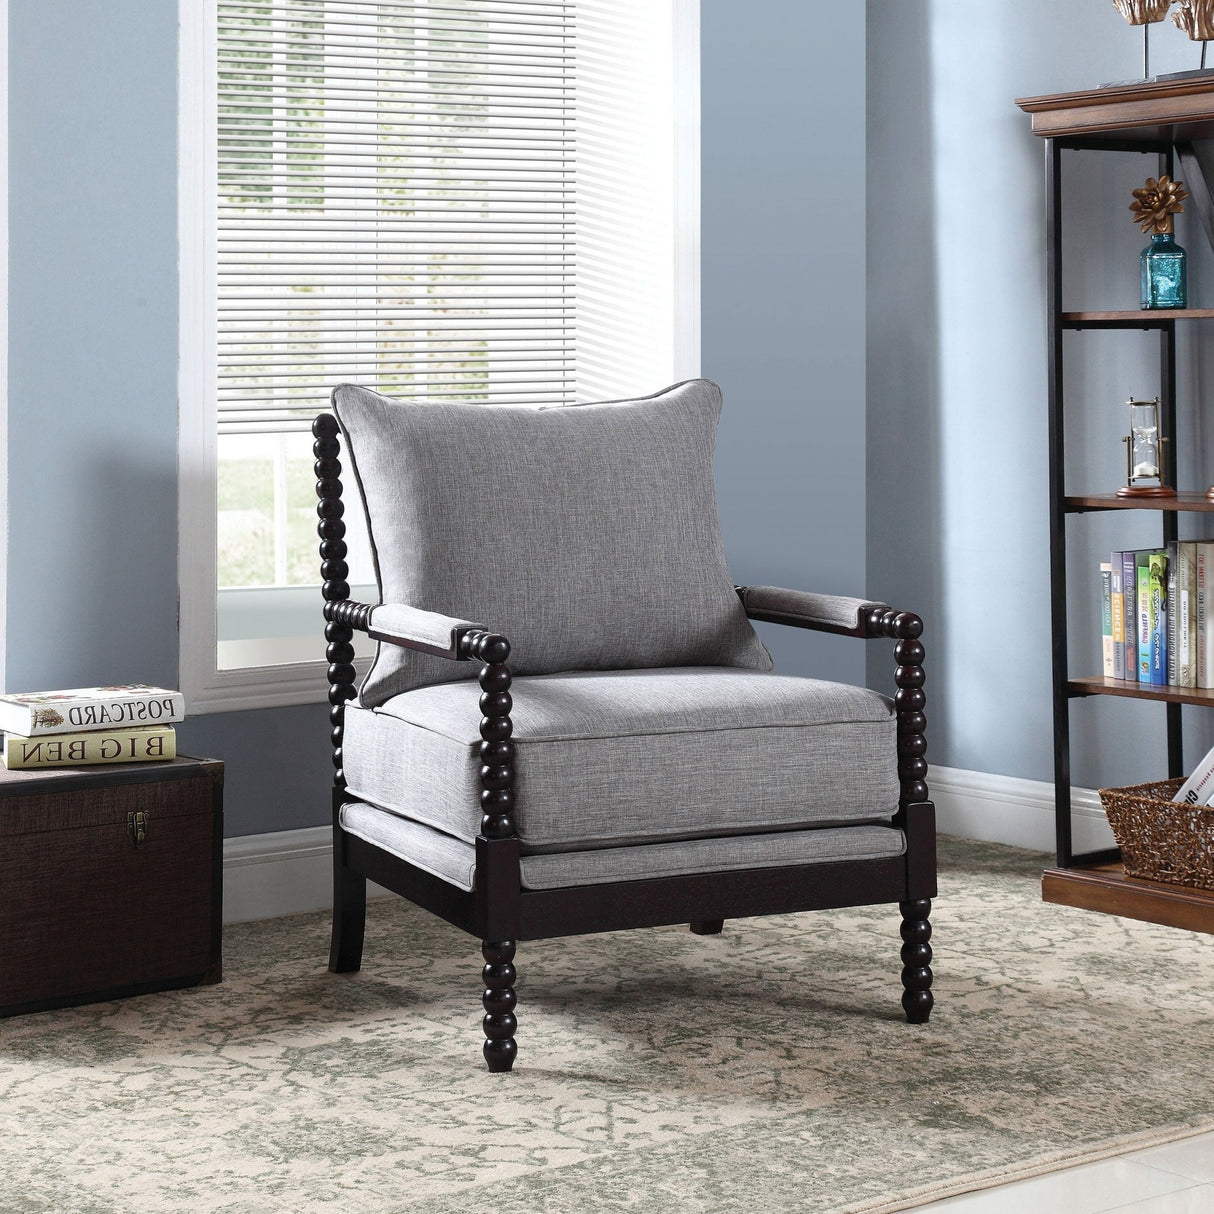 Accent Chair - Blanchett Cushion Back Accent Chair Grey and Black - Accent Chairs - 903824 - image - 2